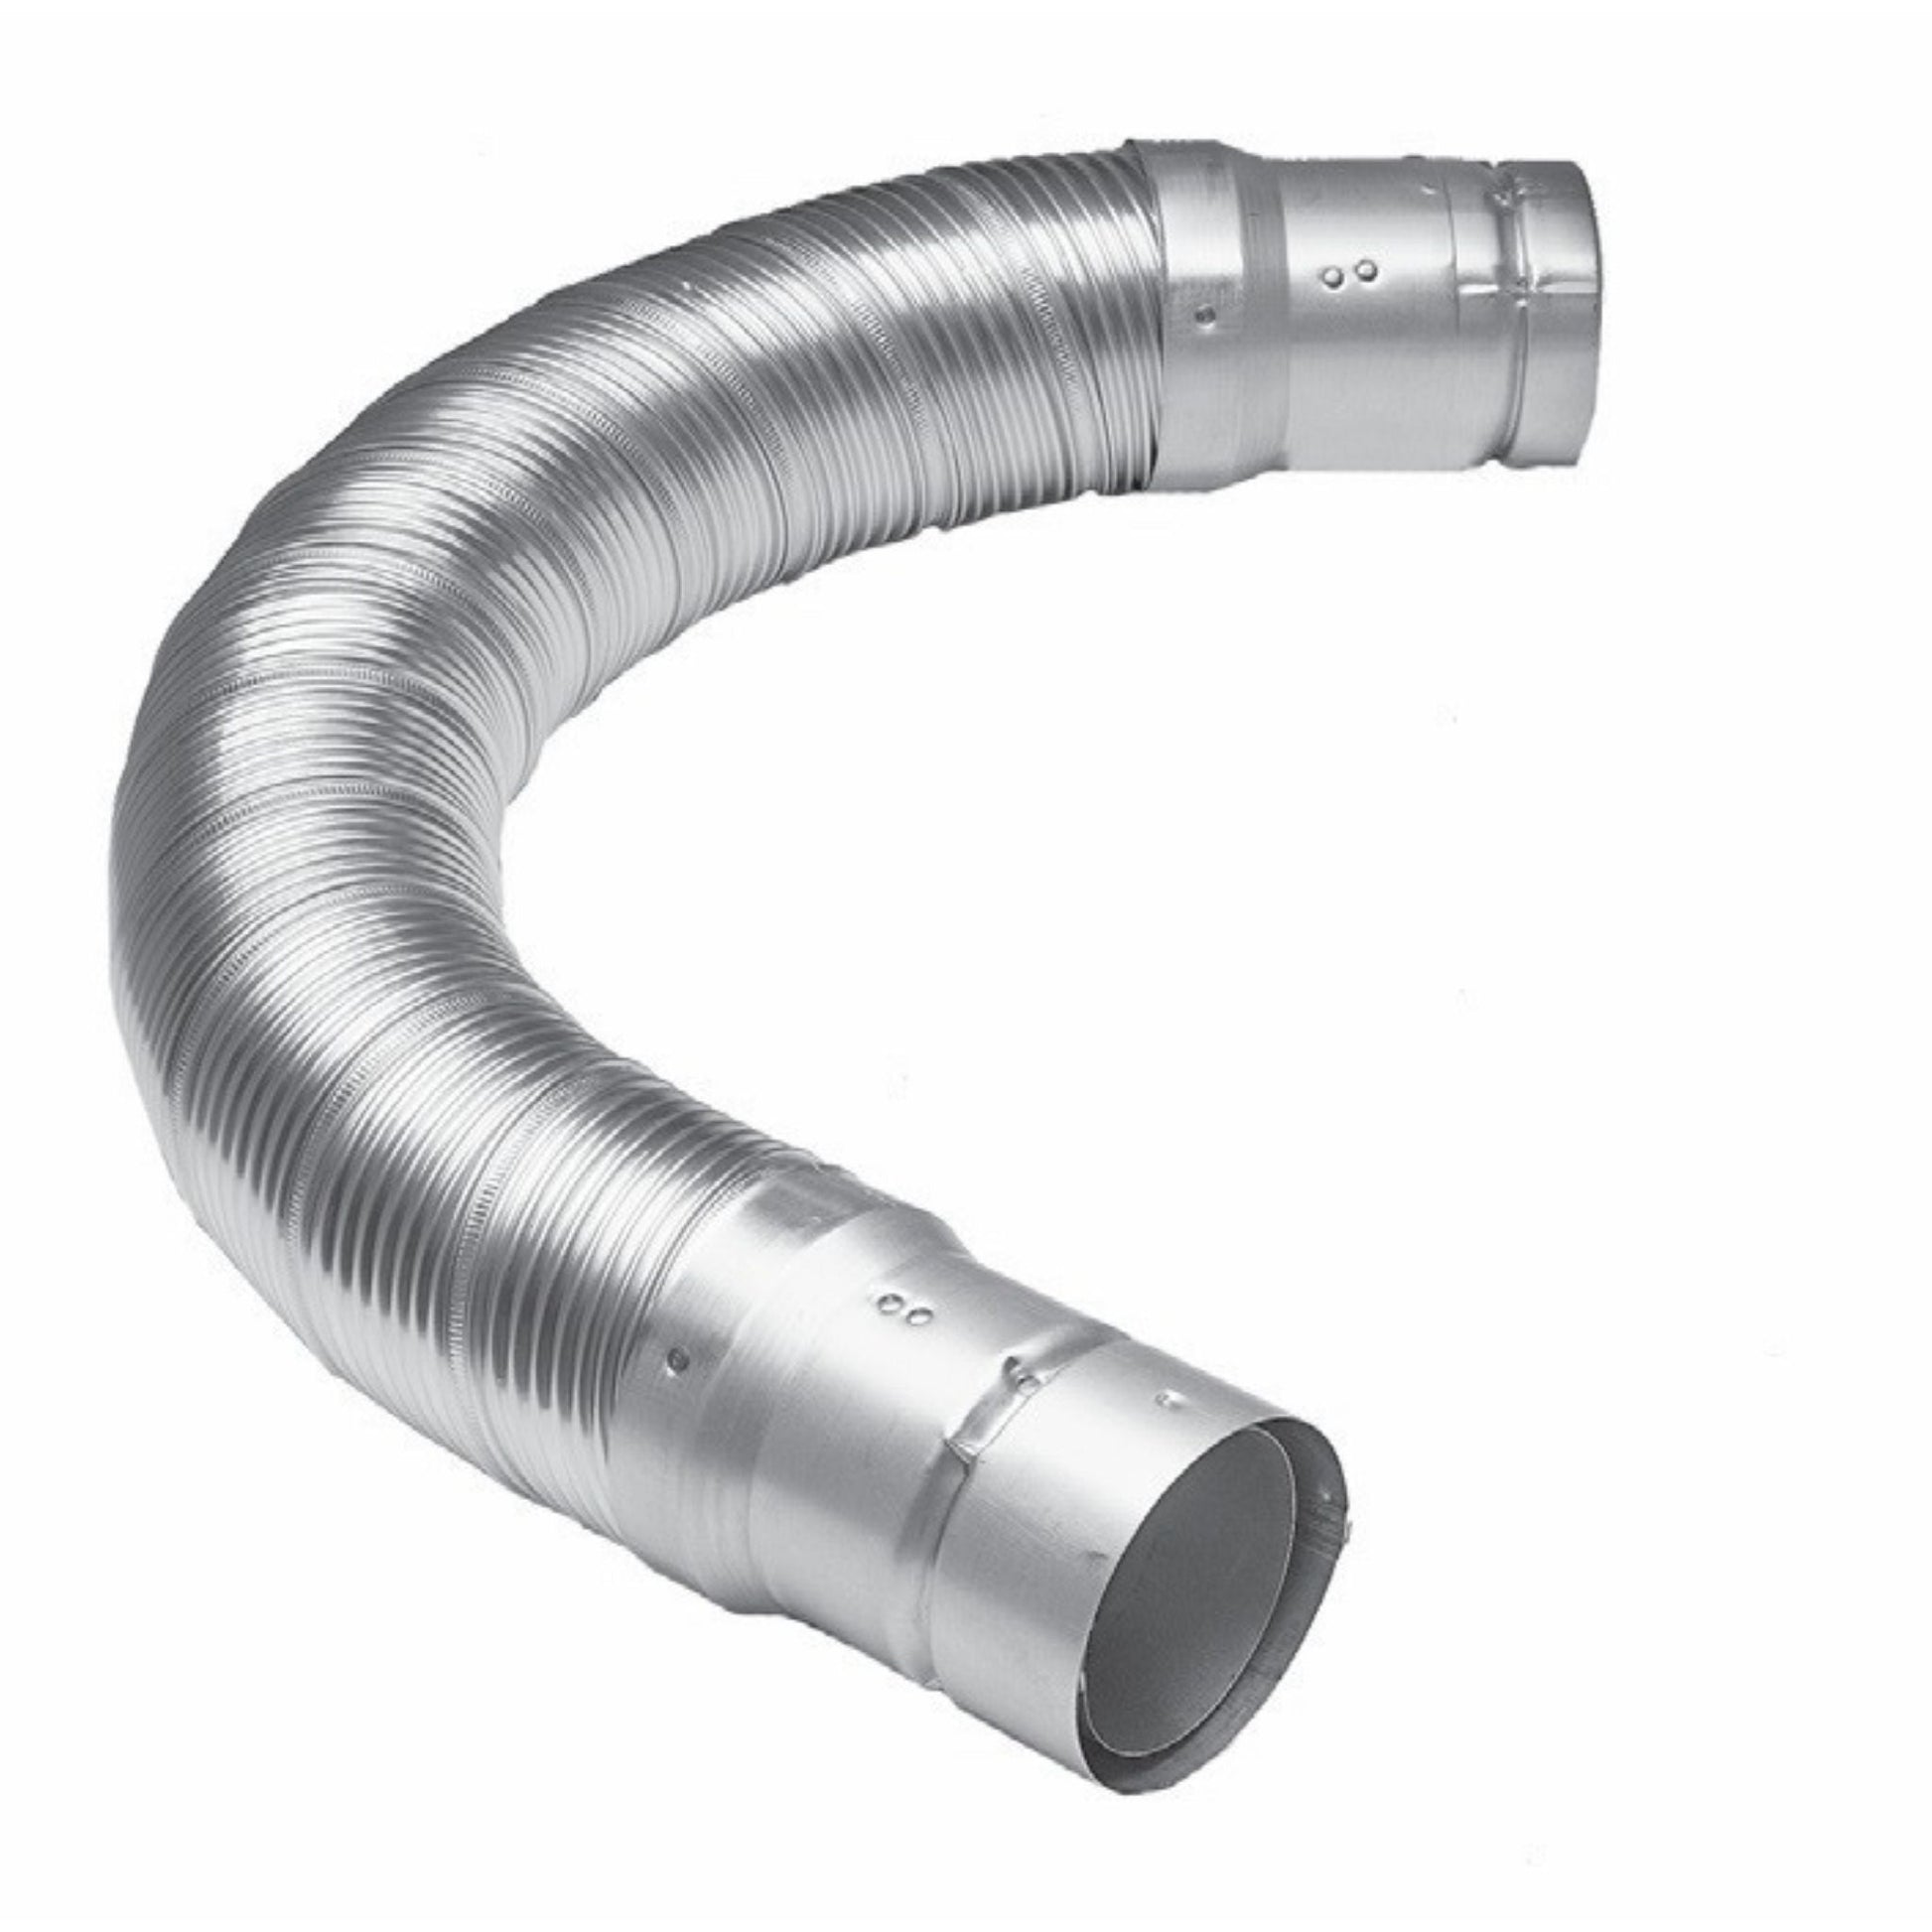 DuraVent DuraConnect II B-Vent 3" x 60" Flexible Double-Wall Gas Vent Connector